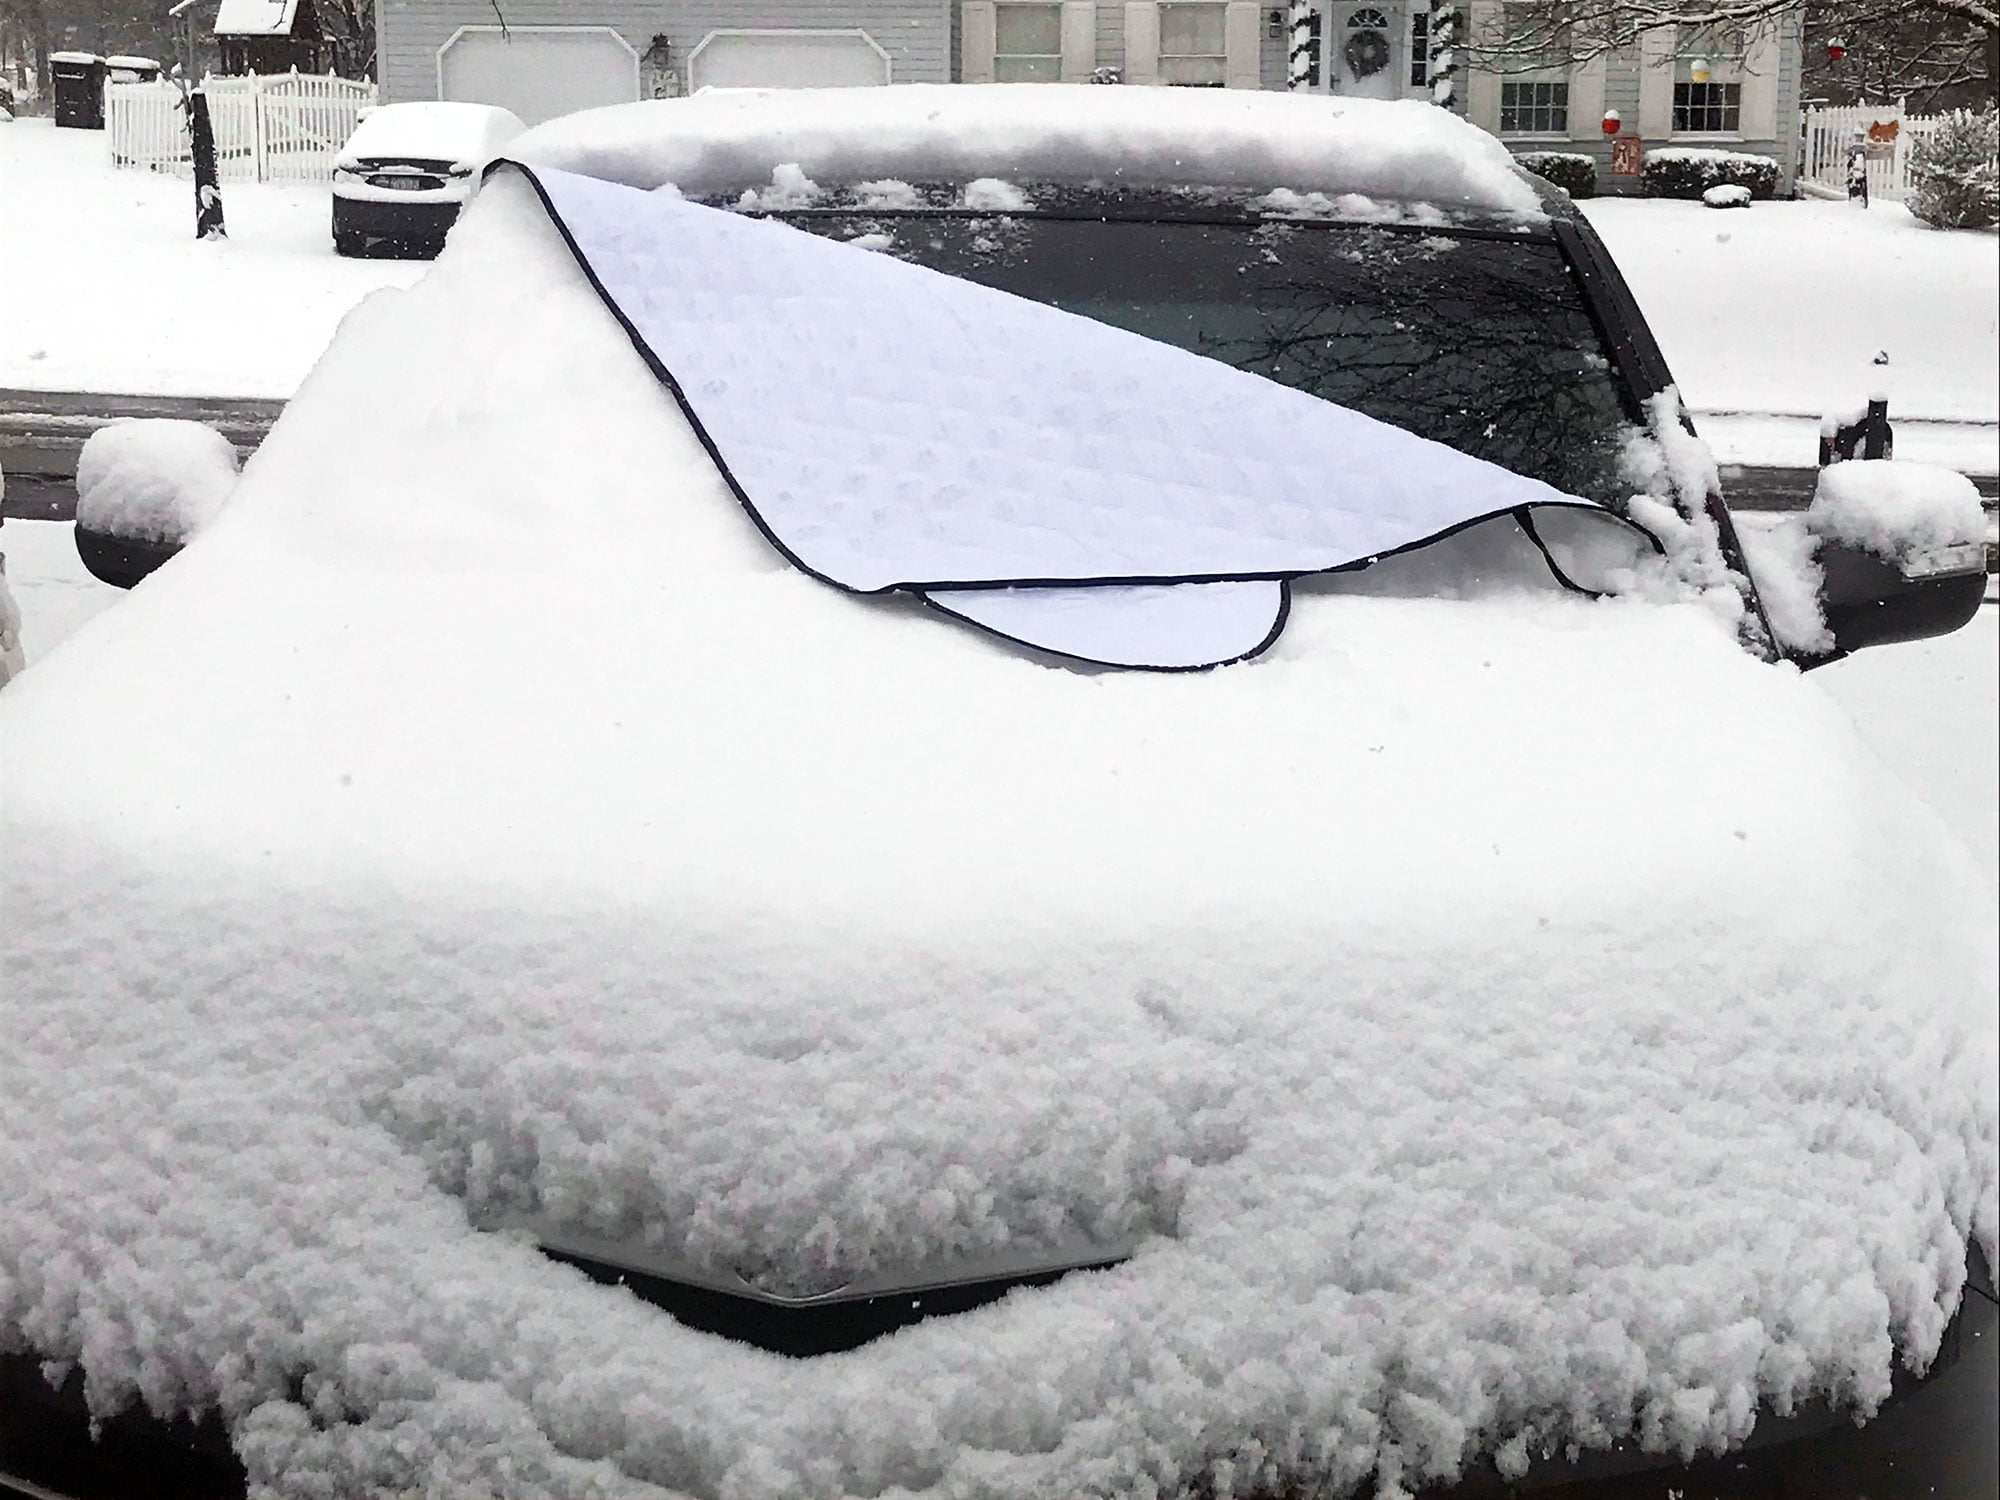 Car Windshield Snow Cover, Fit for car, Large Windshield Cover for Ice